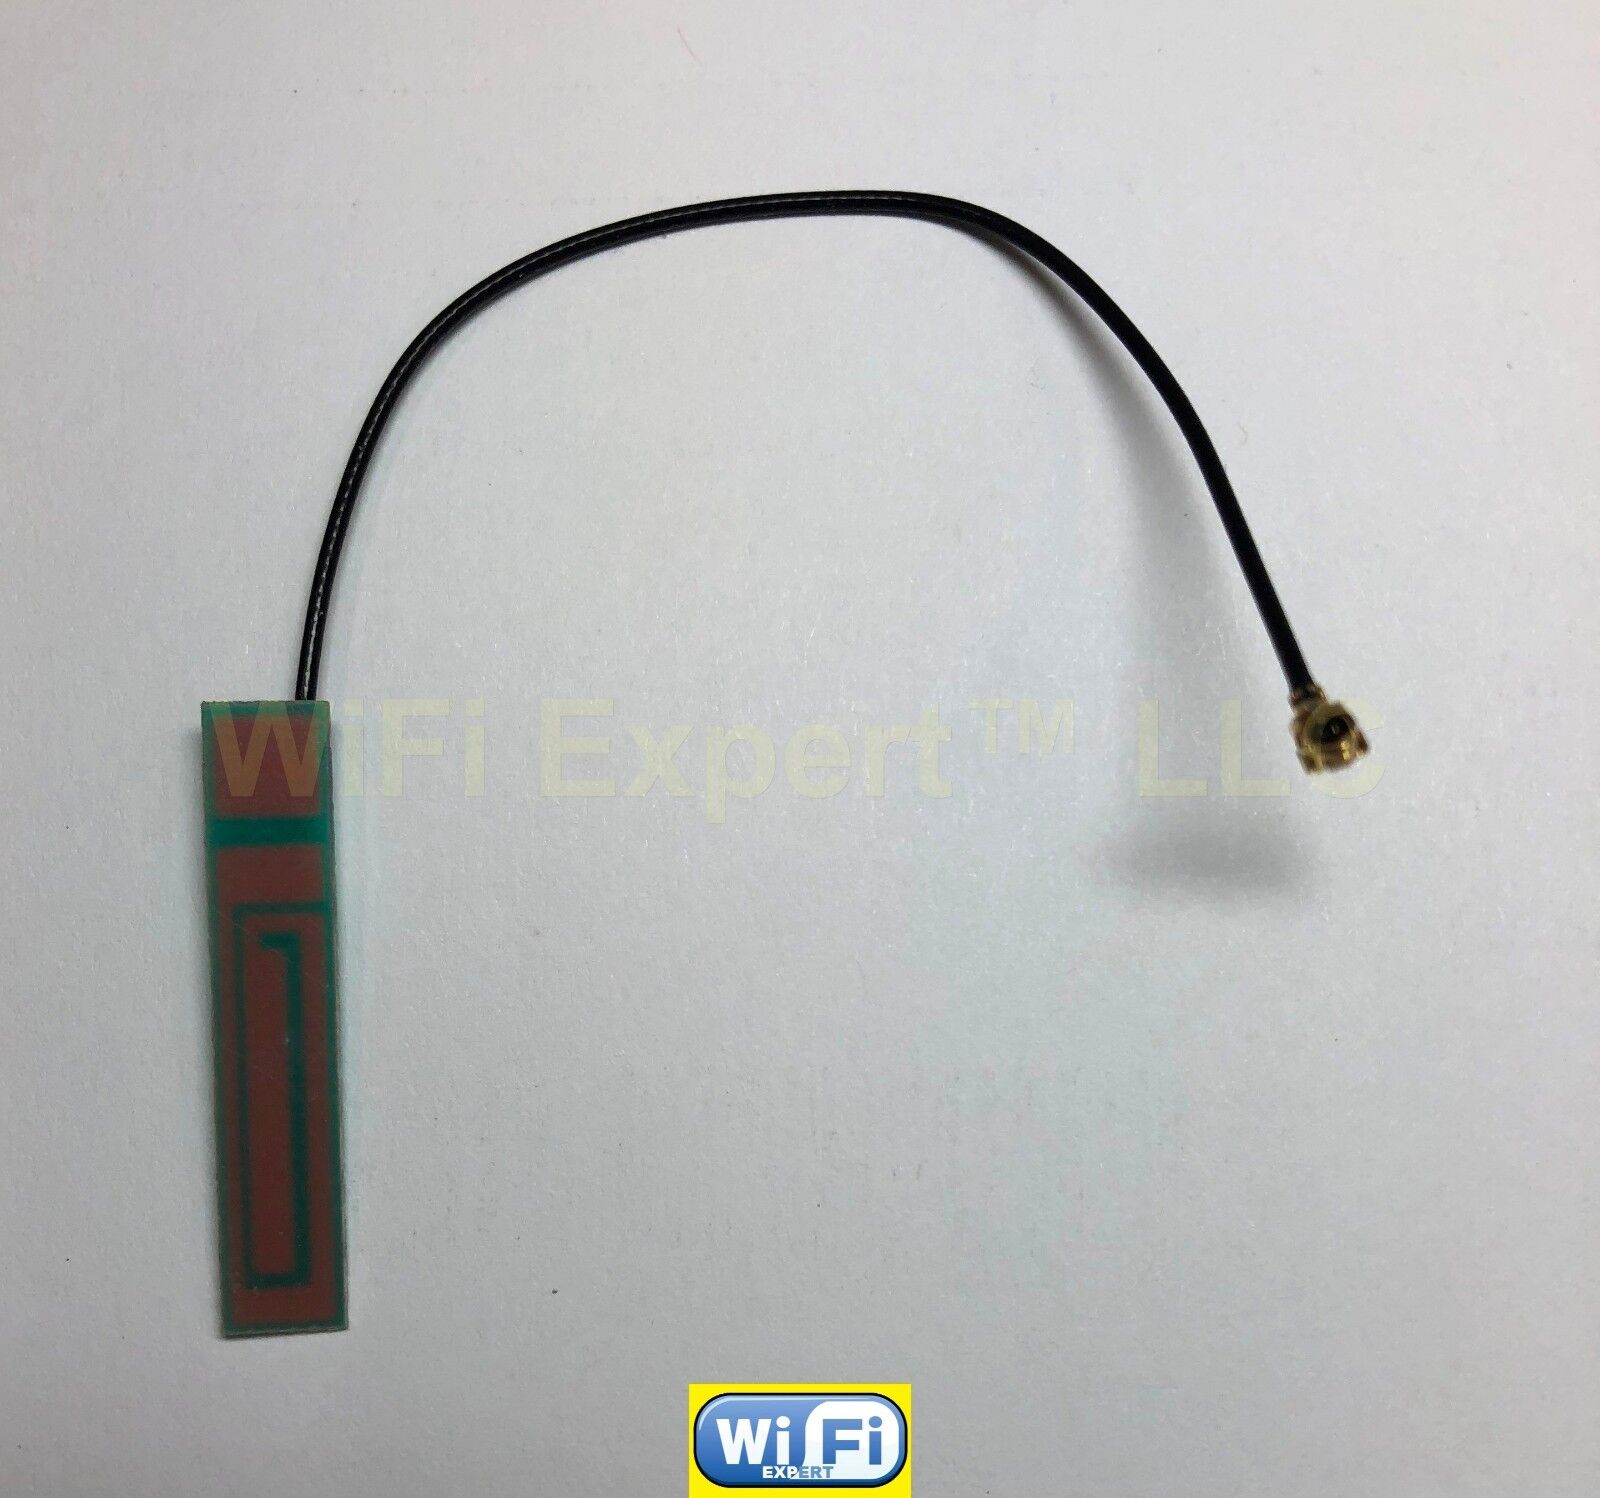 Antenna 2.4GHZ 2dbi IPX U.FL 10CM cable SMT Built-in PCB for PC Laptop notebook